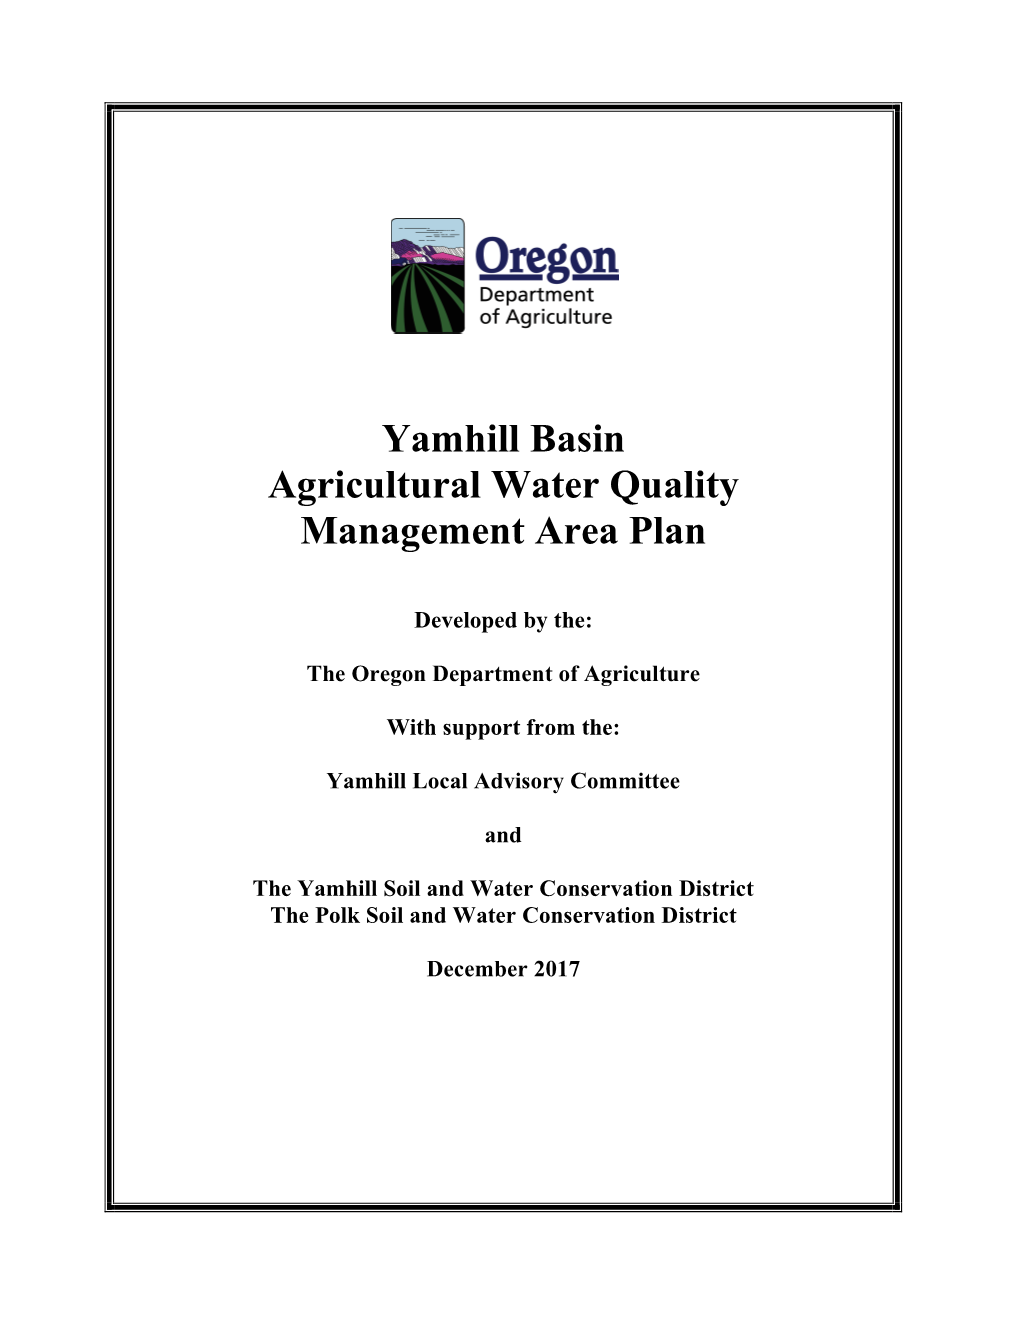 Yamhill Basin Agricultural Water Quality Management Area Plan